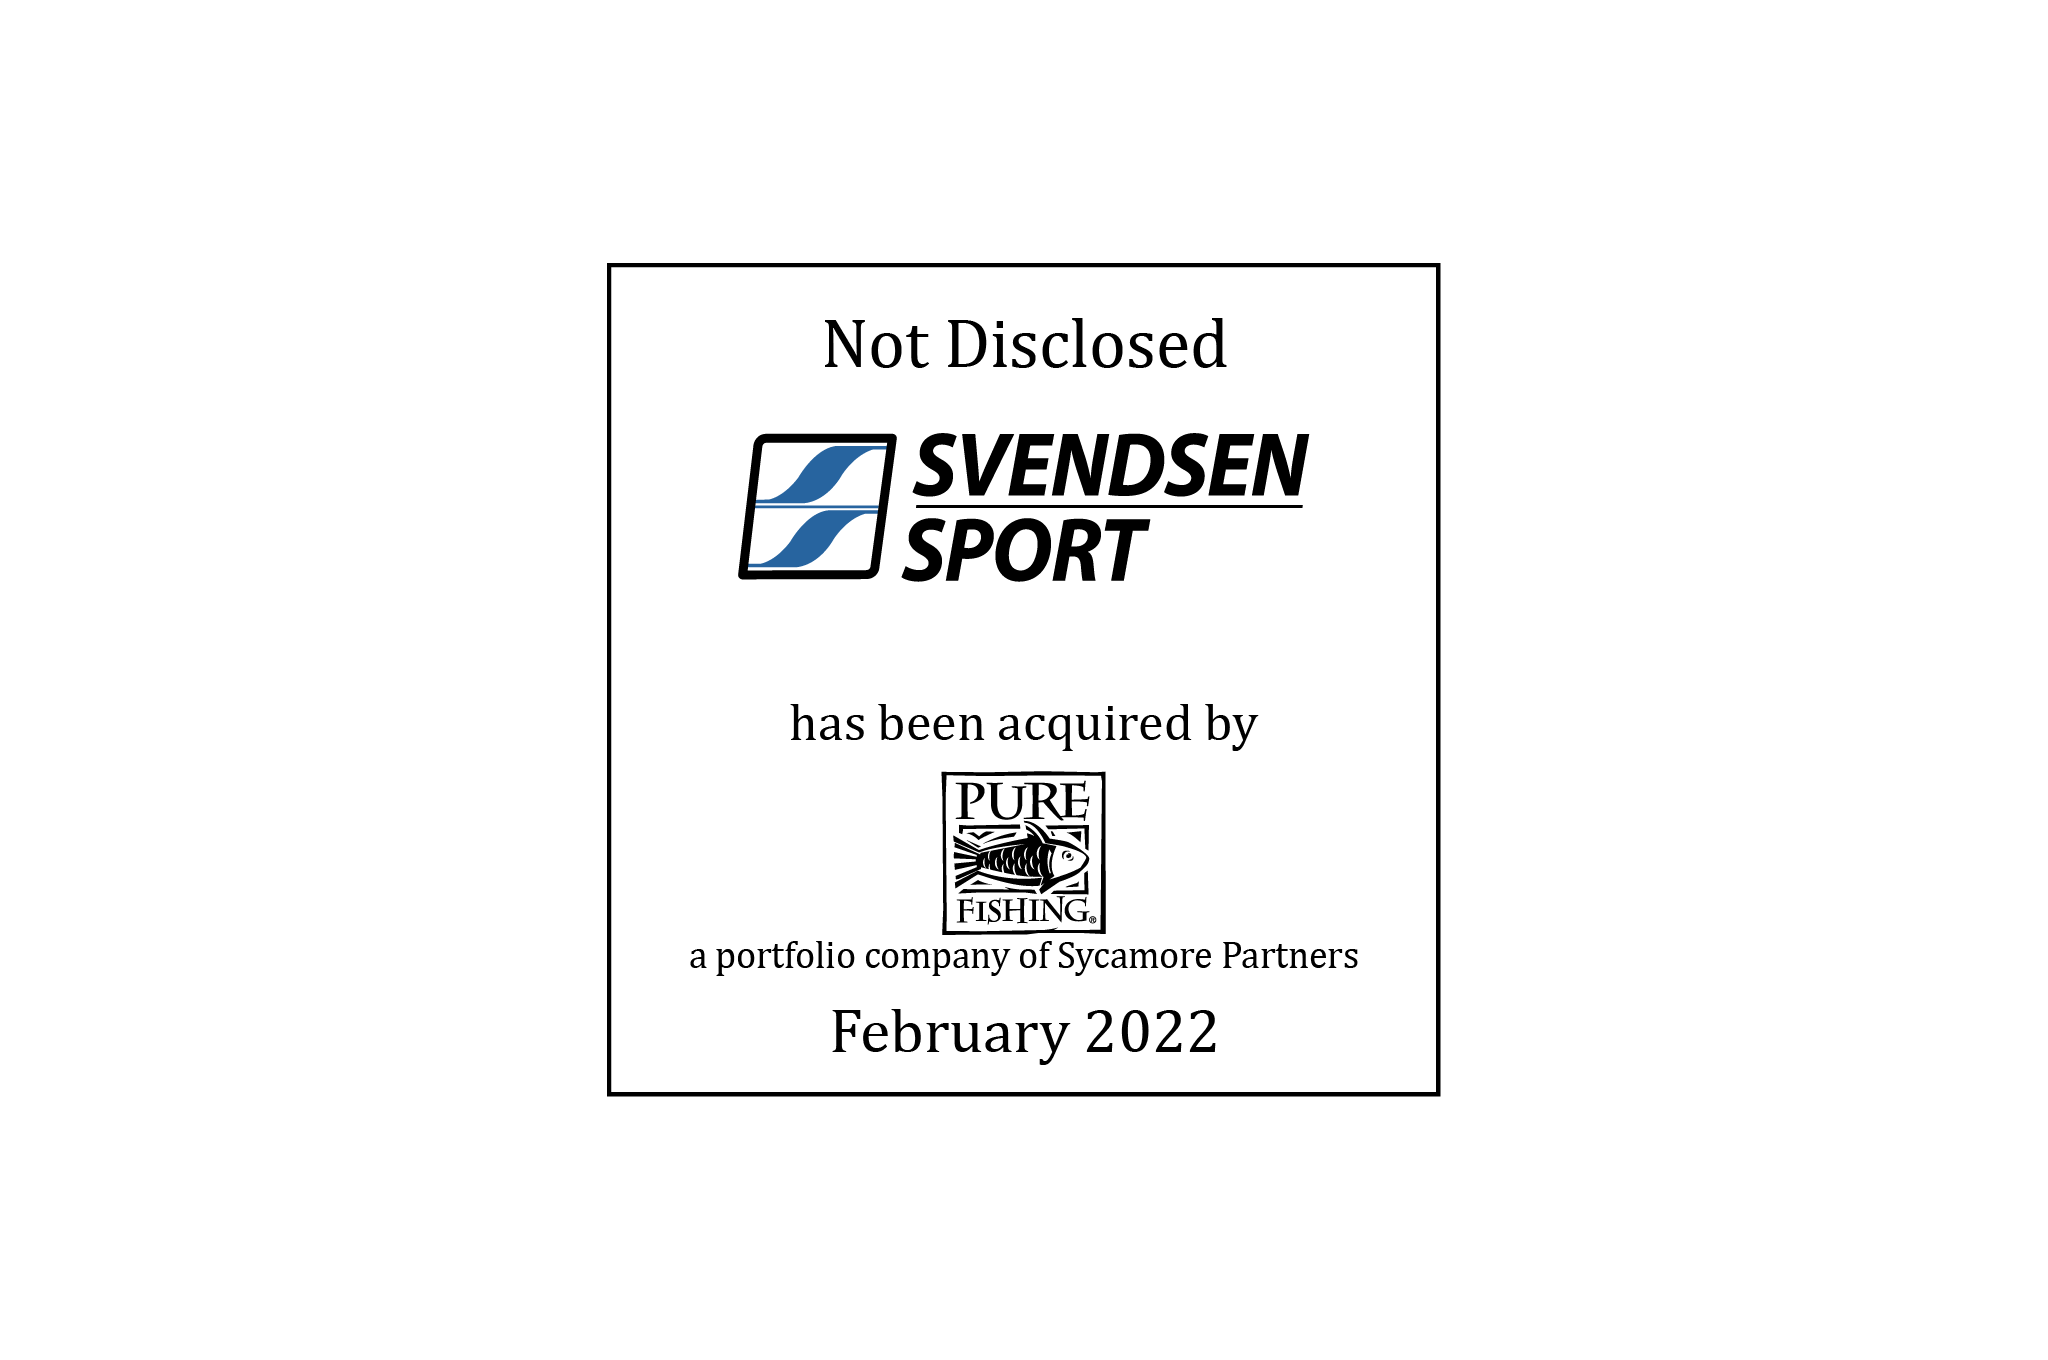 Svendsen Sport has been acquired by Pure Fishing